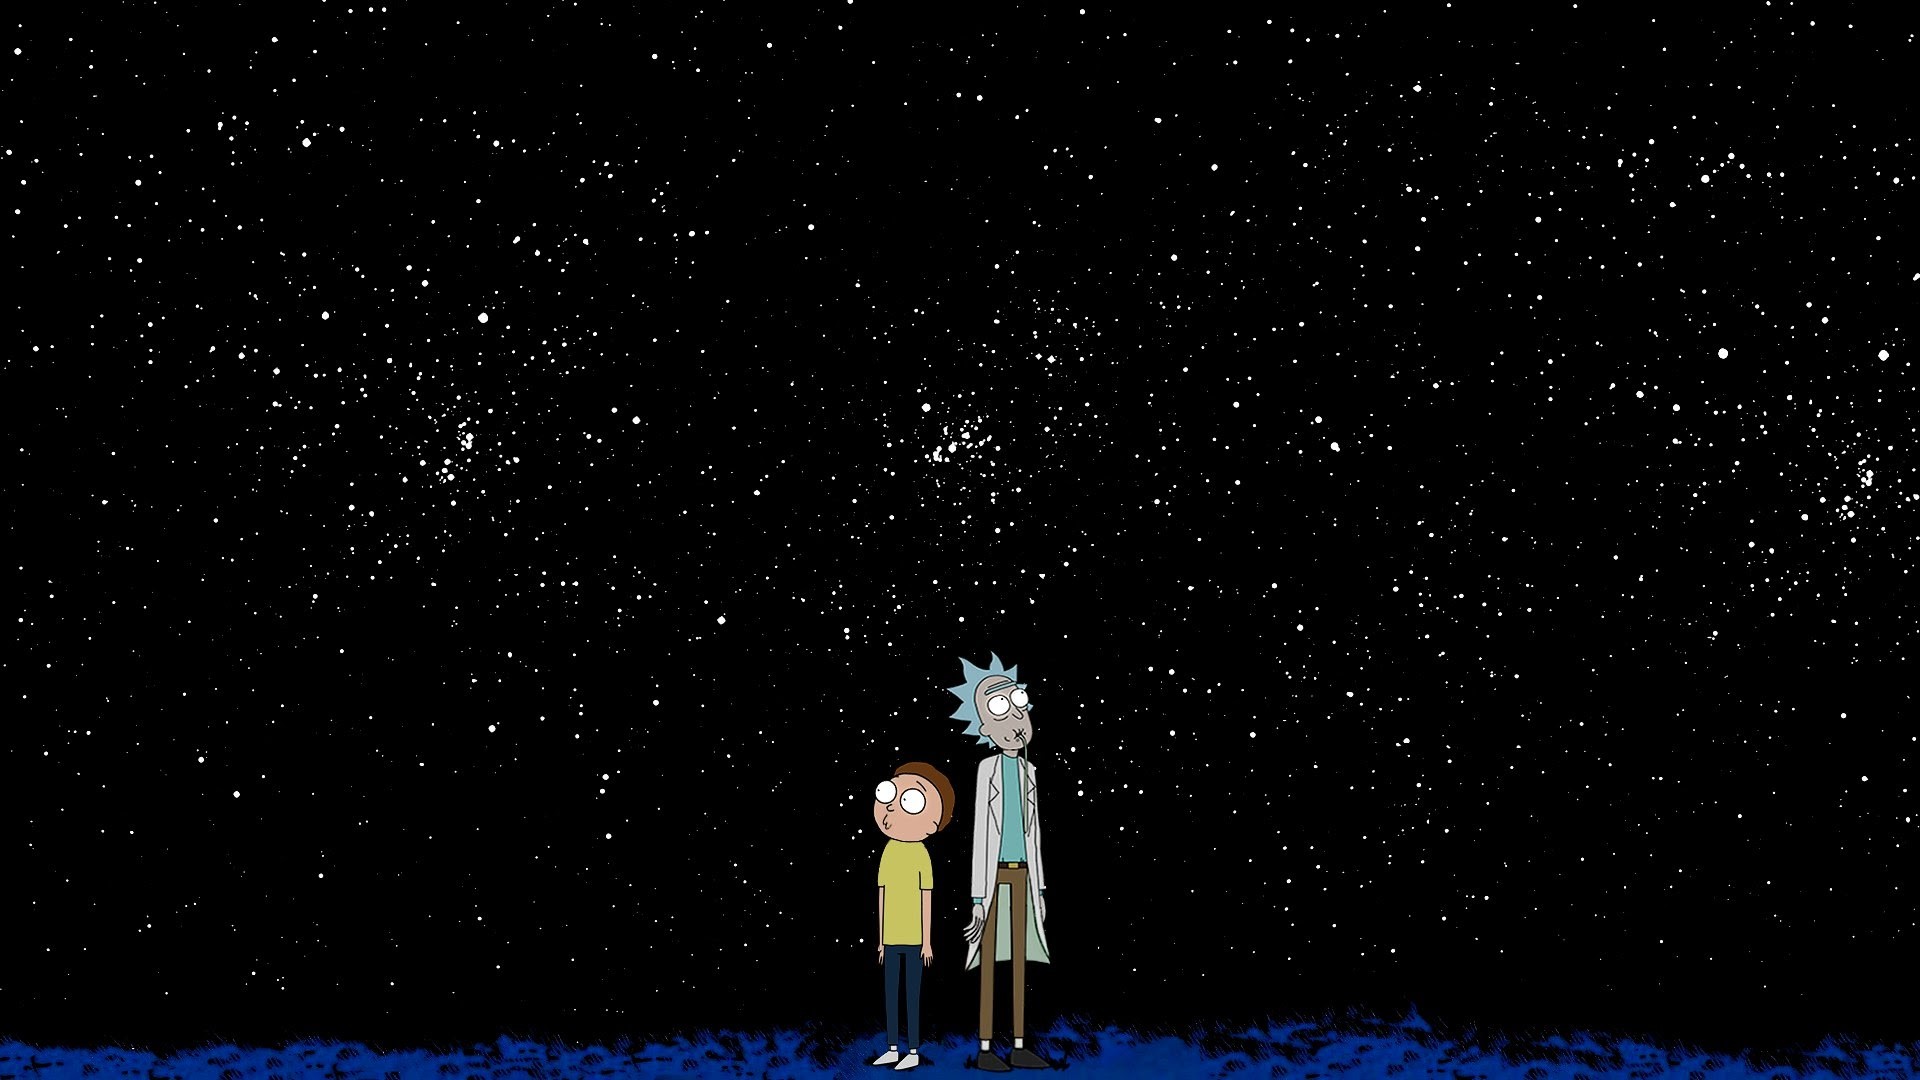 Best Rick and Morty Wallpaper with resolution 1920X1080 pixel. You can use this wallpaper as background for your desktop Computer Screensavers, Android or iPhone smartphones